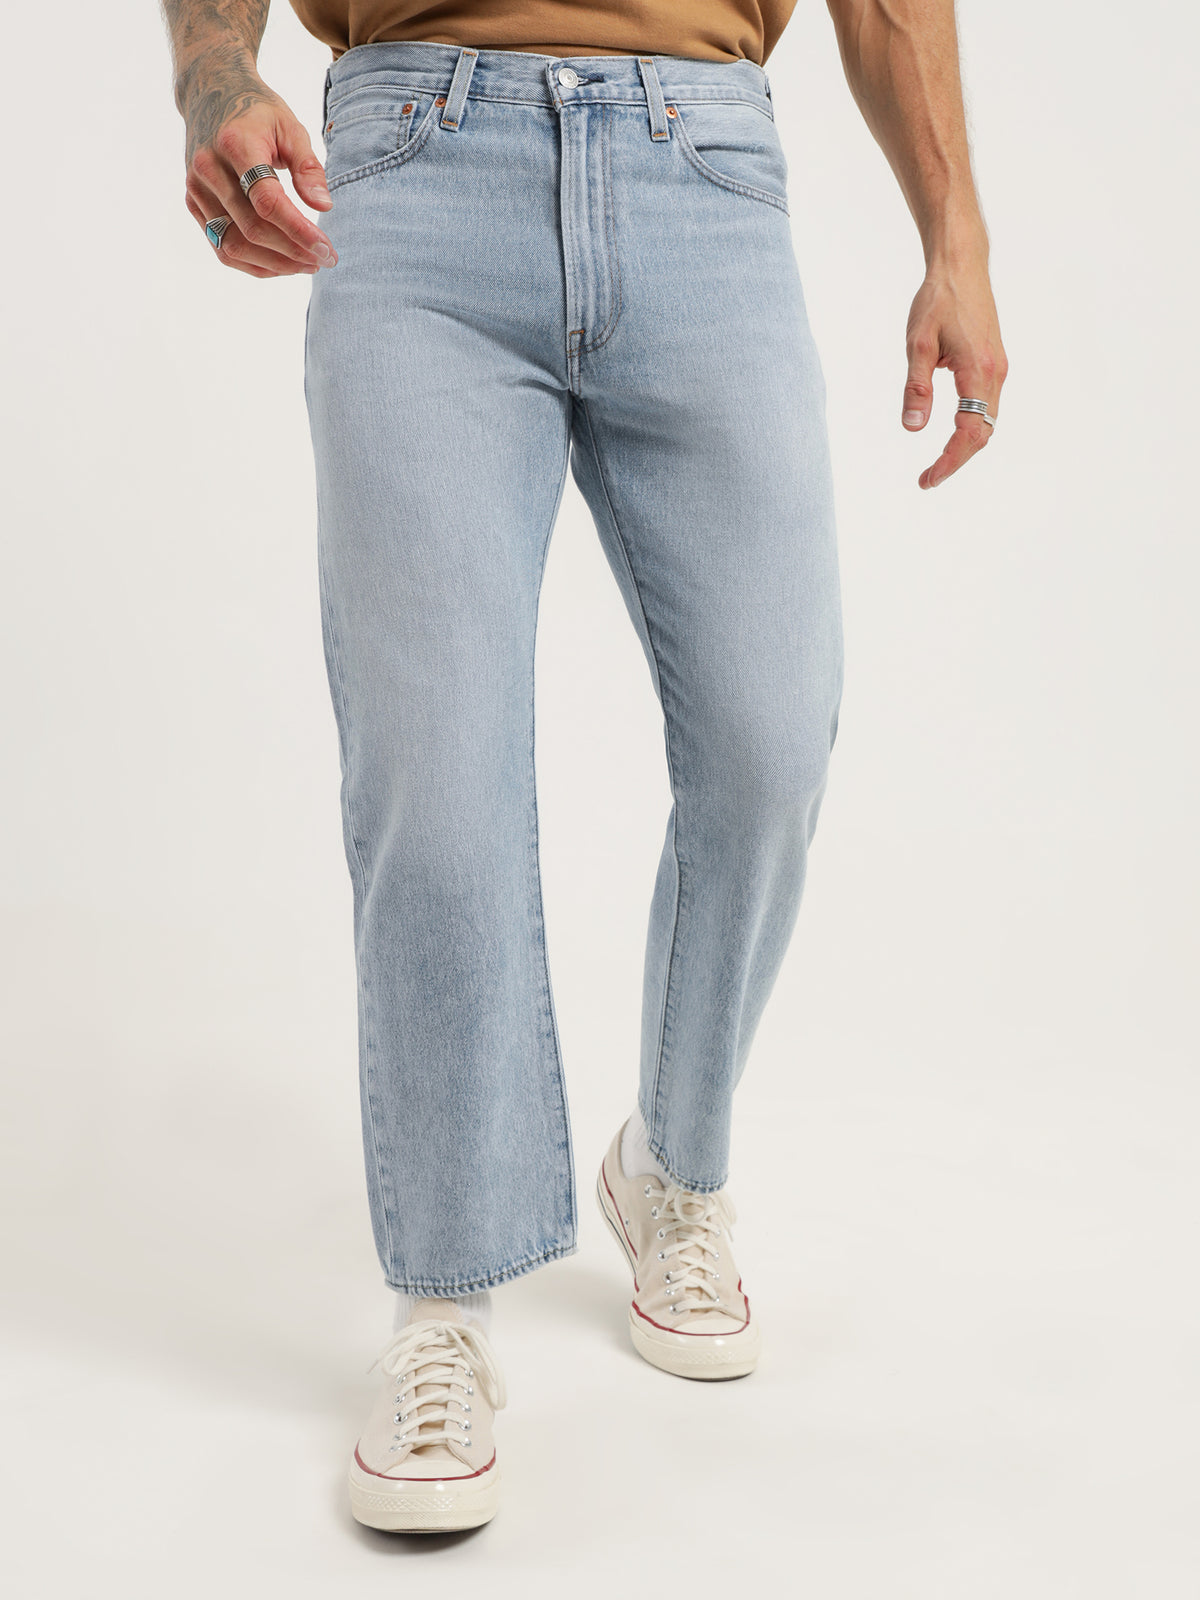 551Z Authentic Straight Leg Jeans in Dream Stone